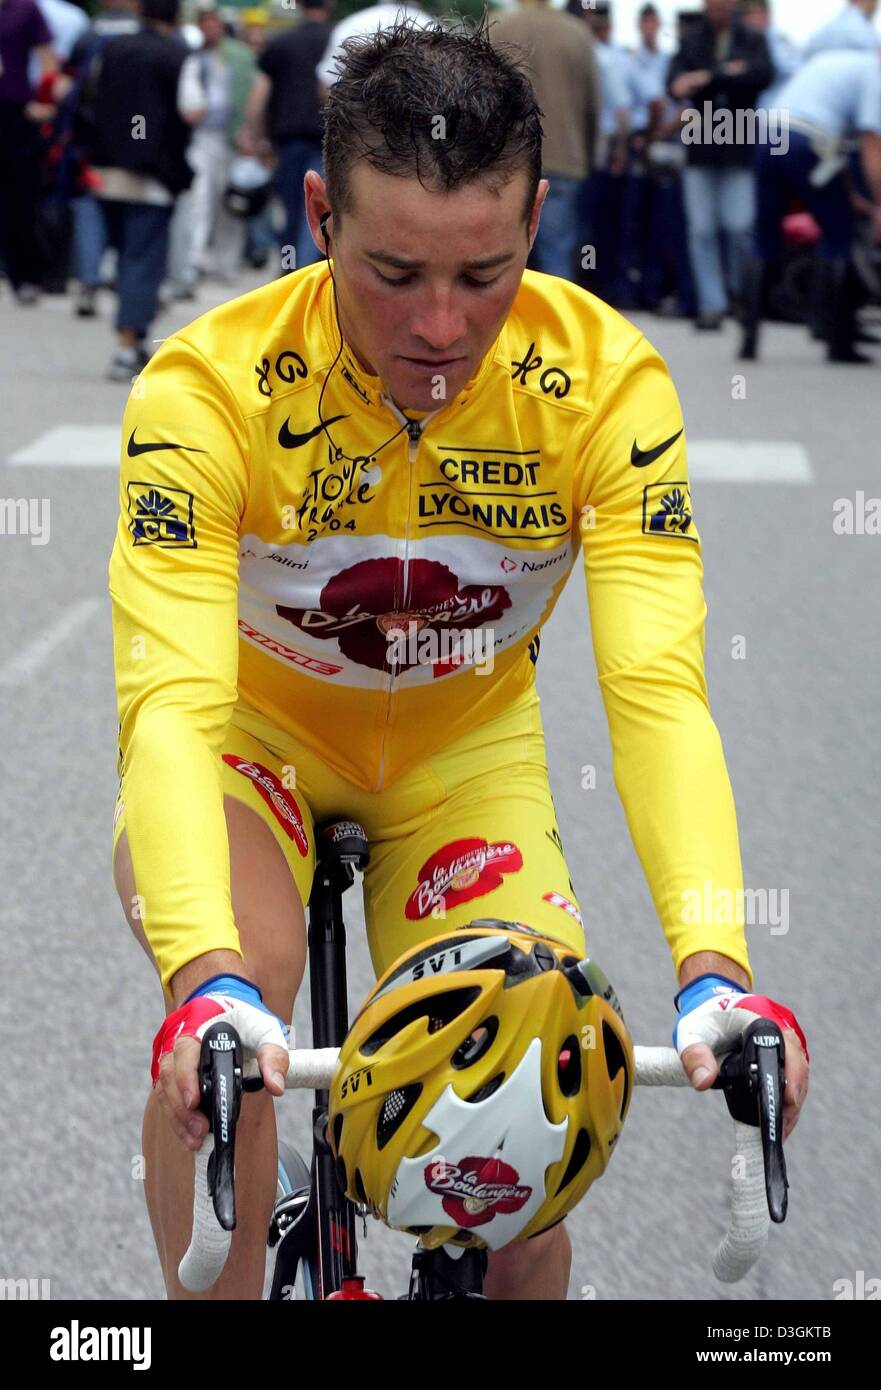 (dpa) - Young French cyclist Thomas Voeckler of team Brioches La Boulangere wears the yellow jersey of the overall leader prior to the start of the 9th stage of the Tour de France cycling race in Saint-Leonard-de-Noblat, France, 13 July 2004. The 160.5 km long stage from Saint-Leonard-de-Noblat to Gueret was the shortest stage of the Tour. Voeckler was able to successfully defend t Stock Photo